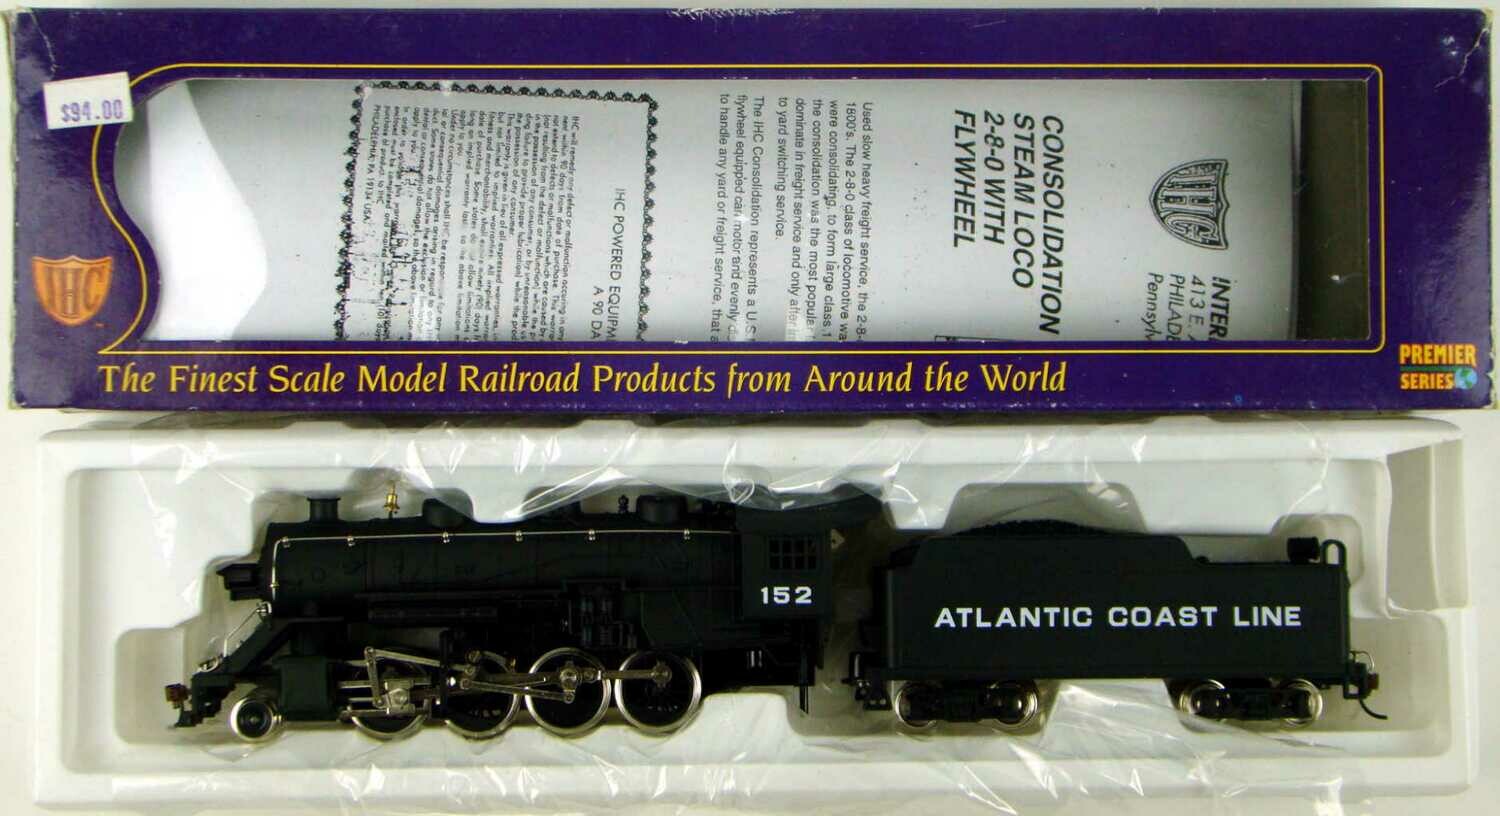 Ihc Premier M9501 Acl 2 8 0 Consolidation Locomotive Ho Scale